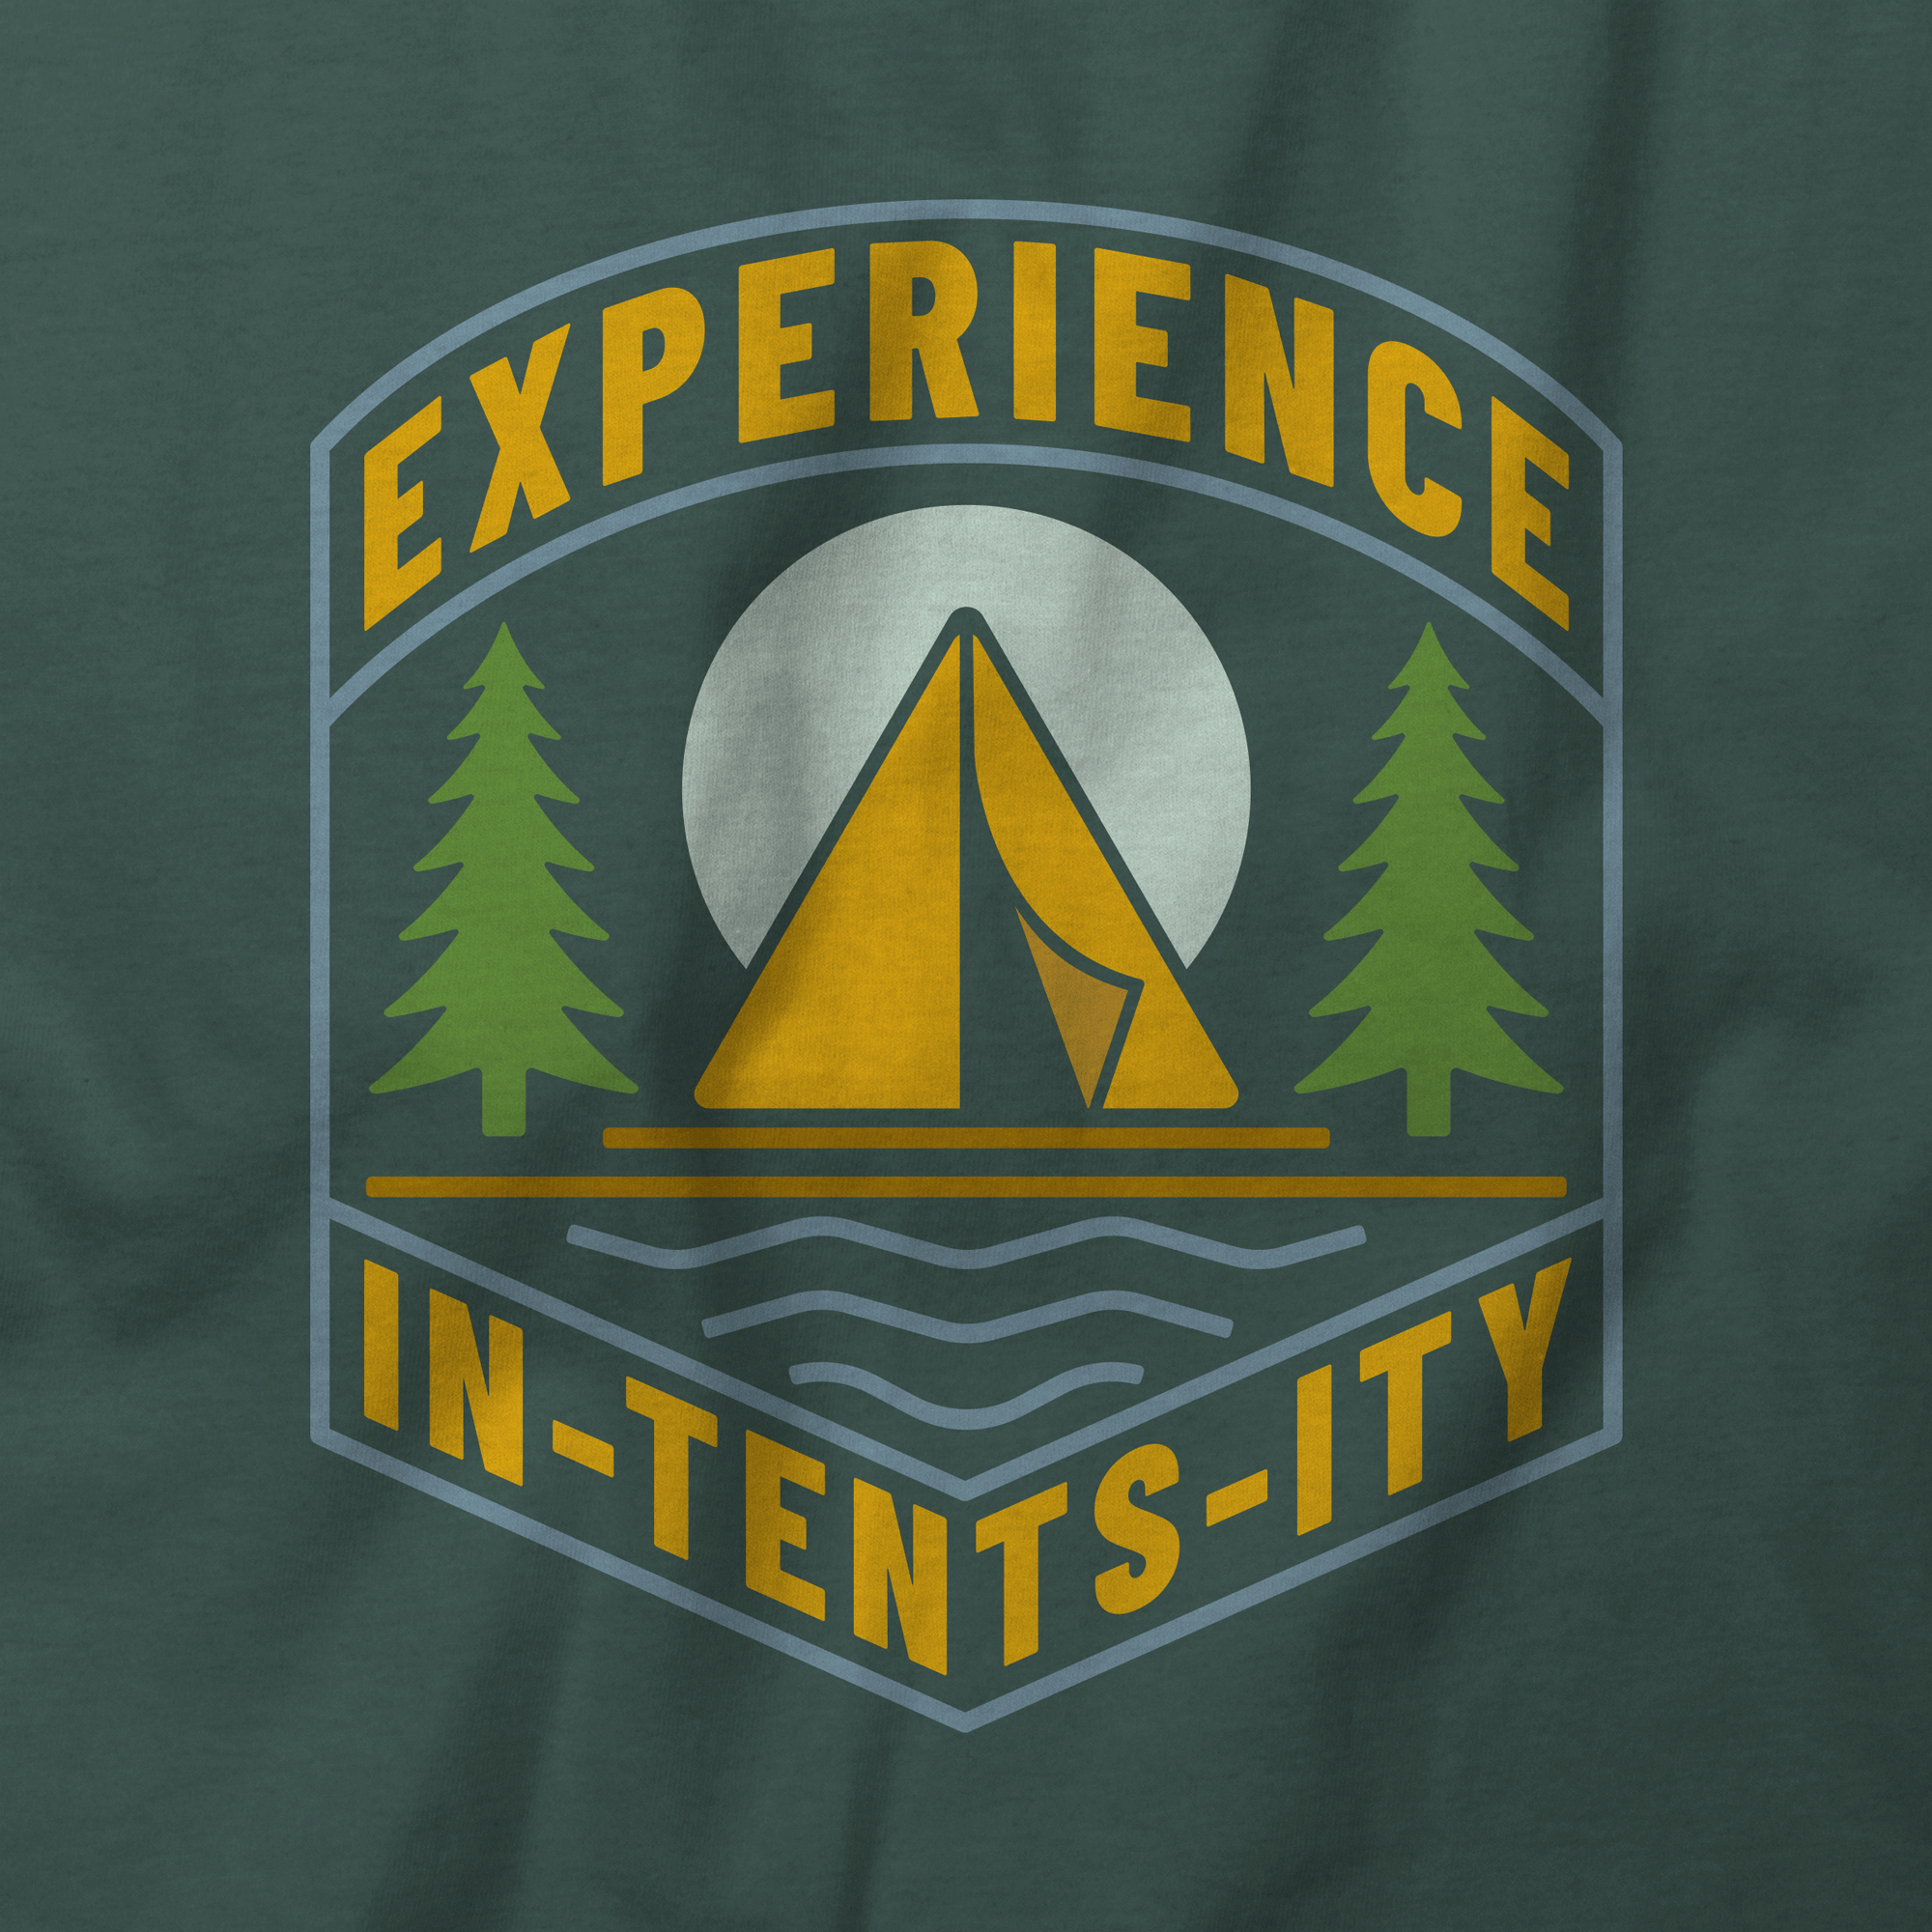 Experience In-TENTS-ity T-Shirt